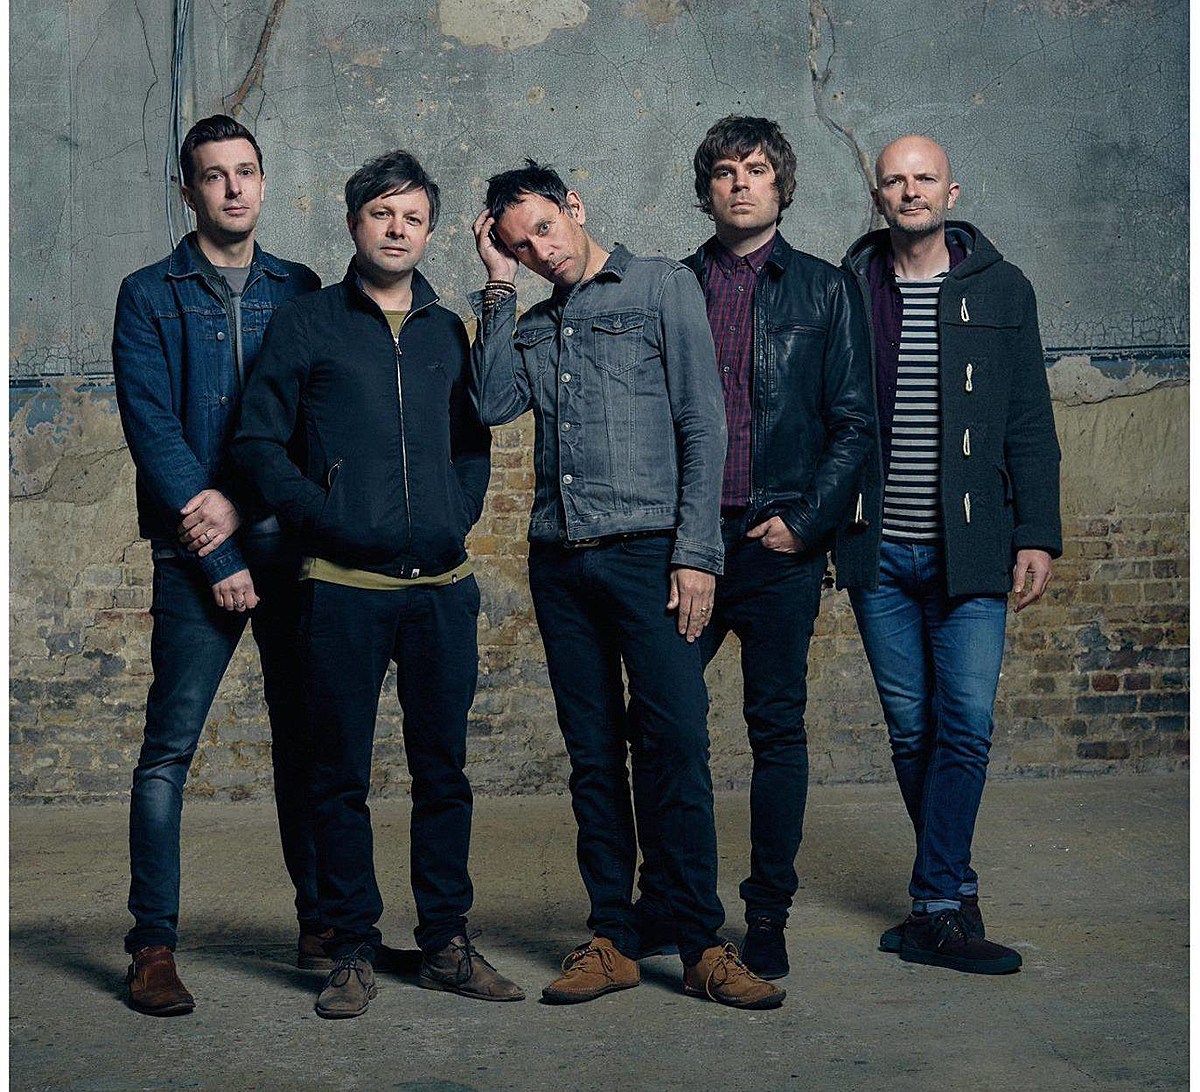 gigs and tours shed seven